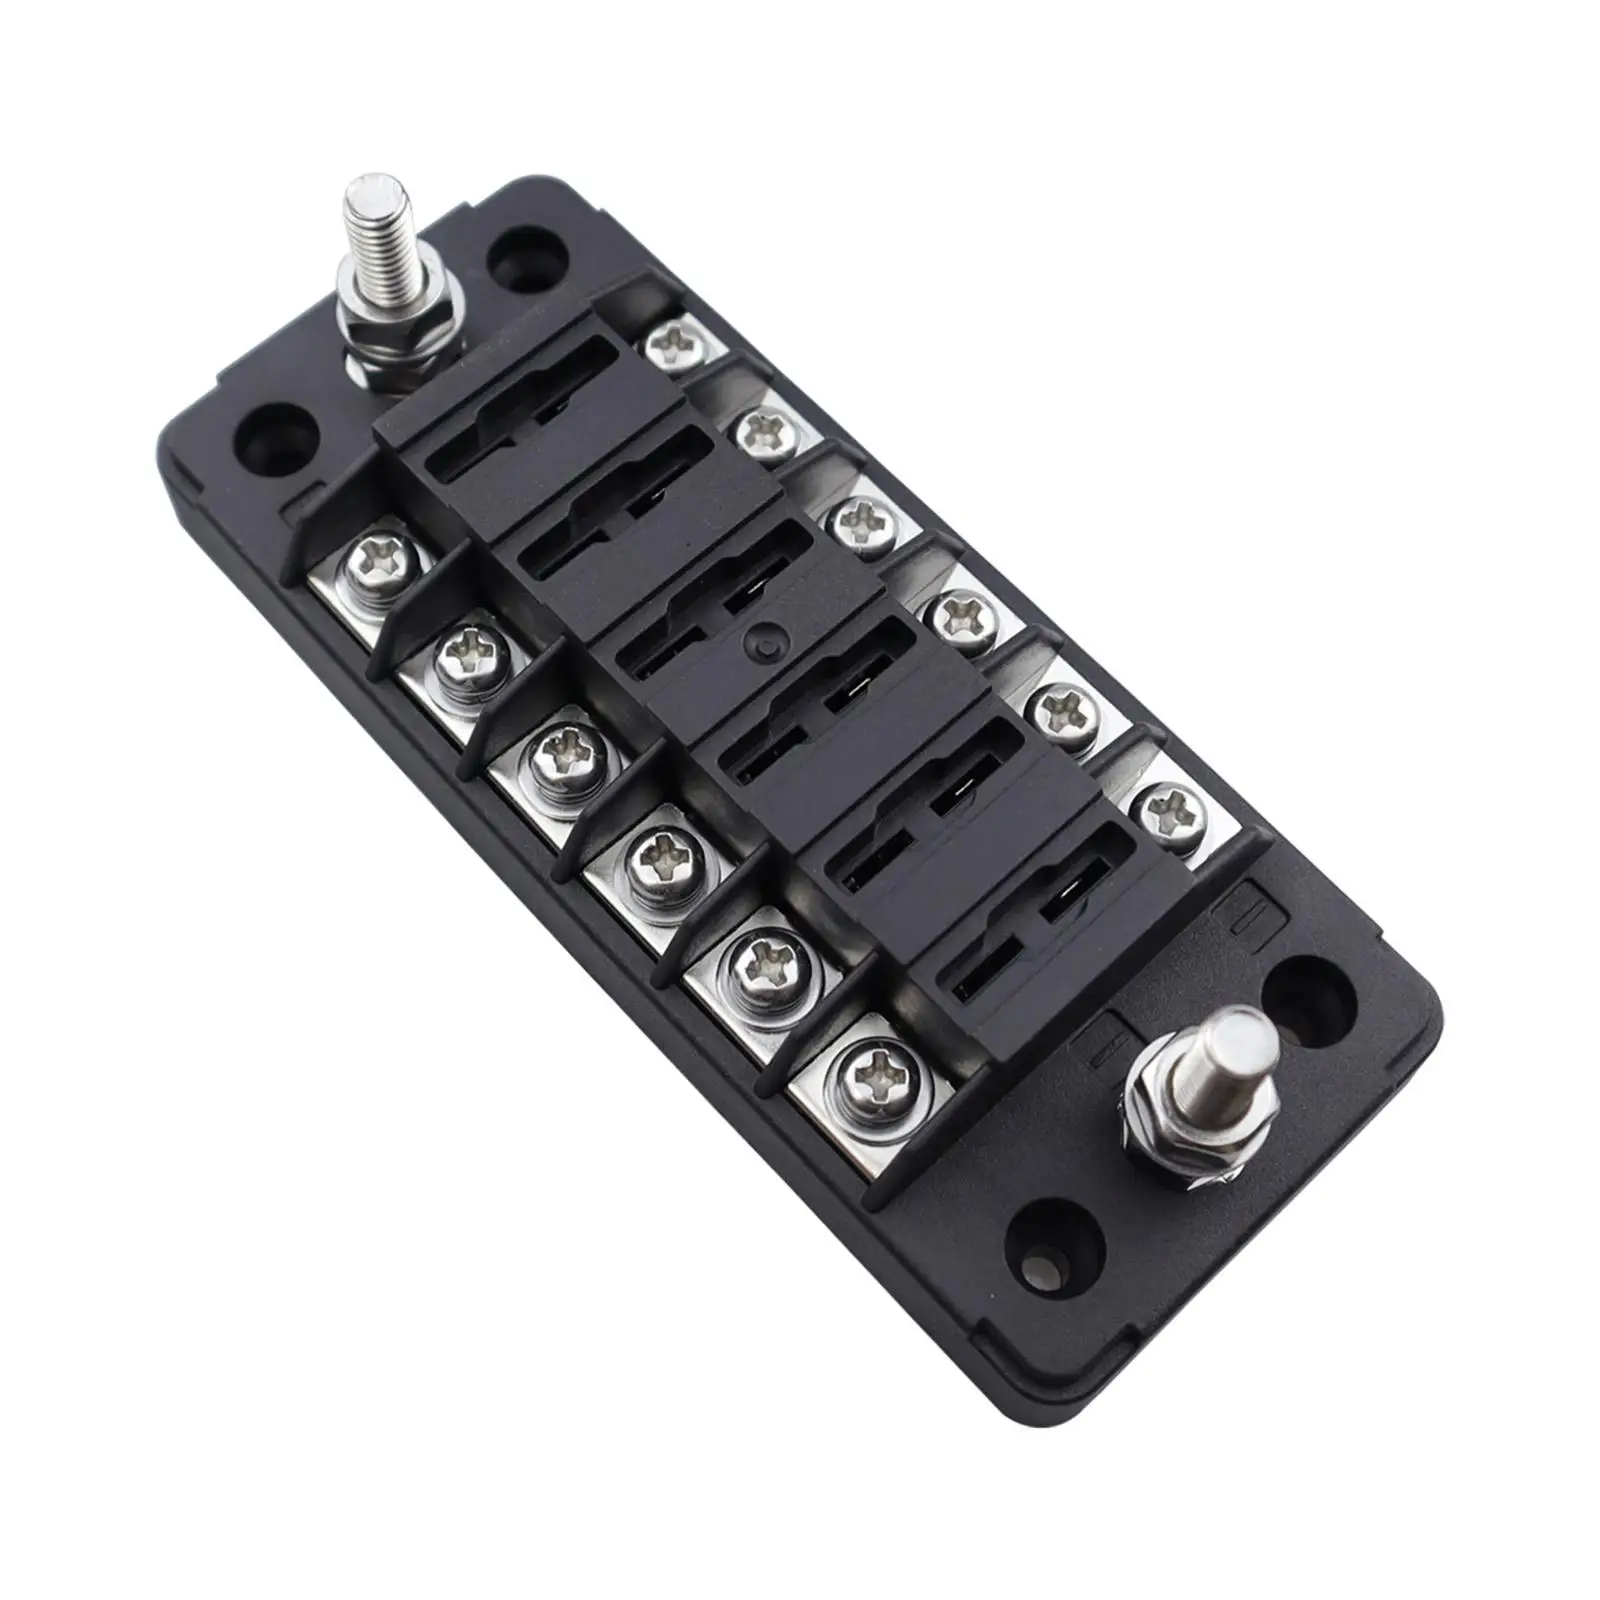 6 Way Blade Fuse Block Waterproof with Negative Bus Circuit Holder Panel Fuse Box for Marine Automotive SUV Vehicle Car